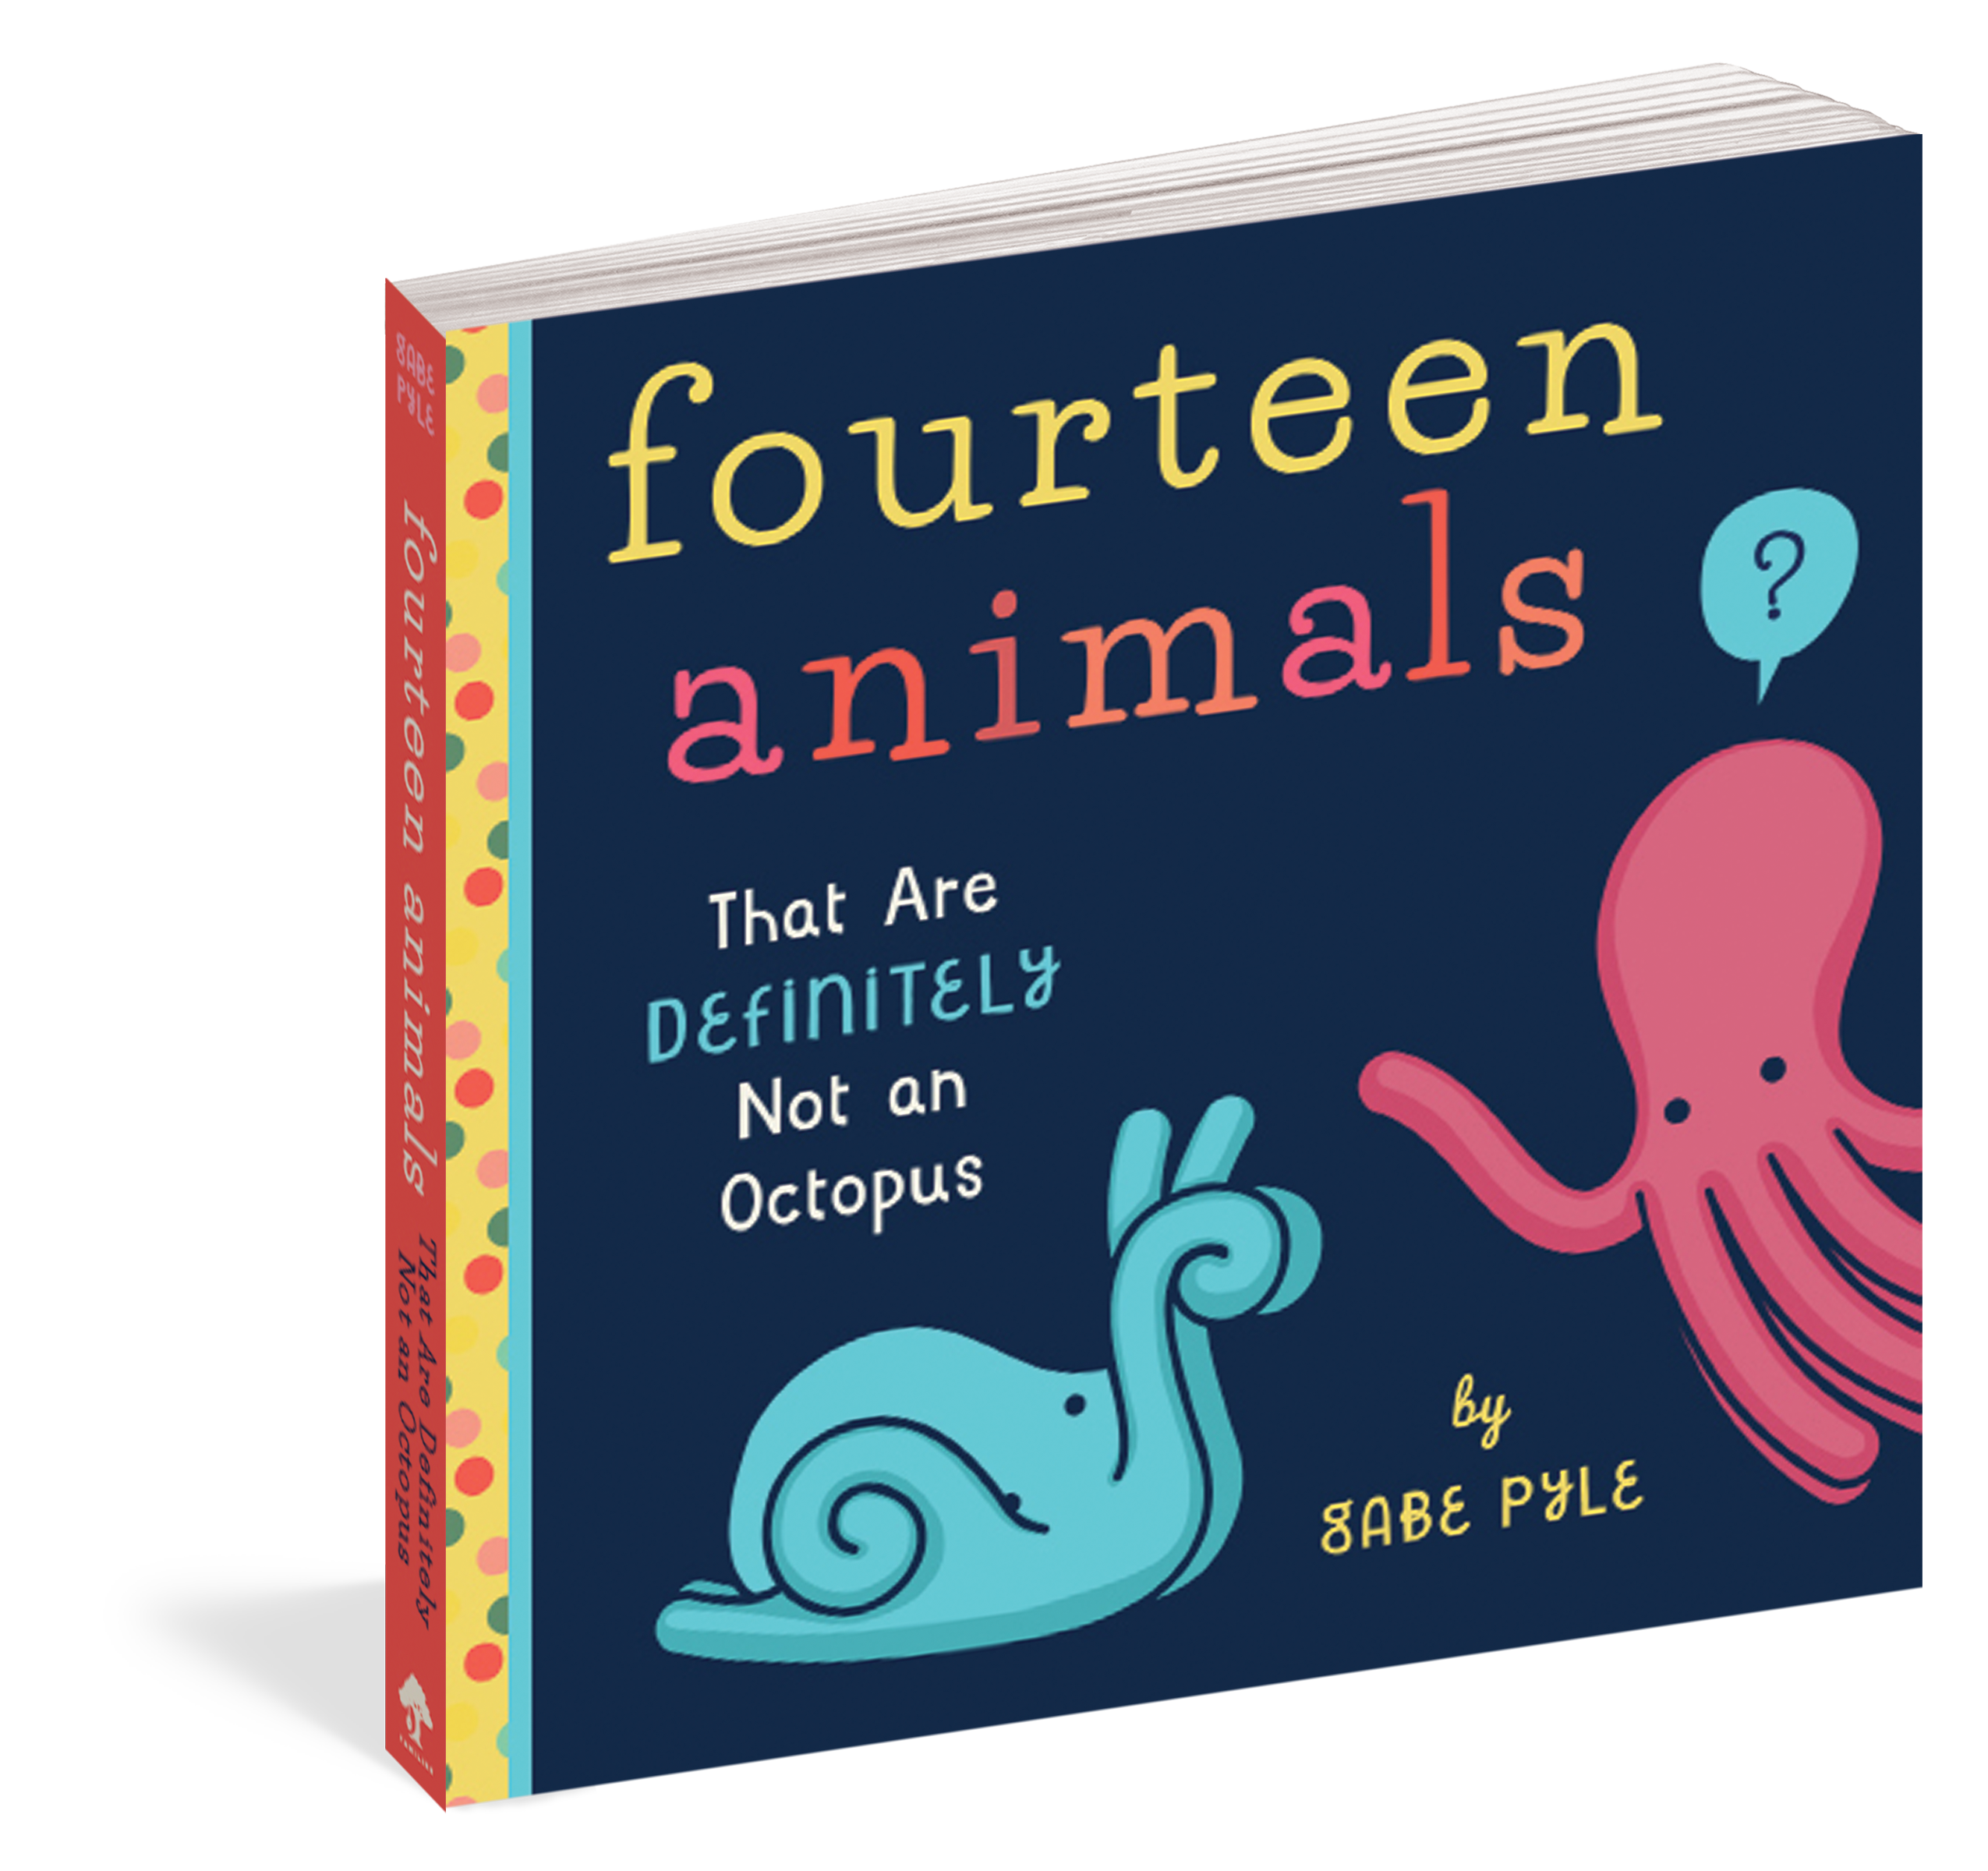 The cover of the board book Fourteen Animals (That Are Definitely Not an Octopus).